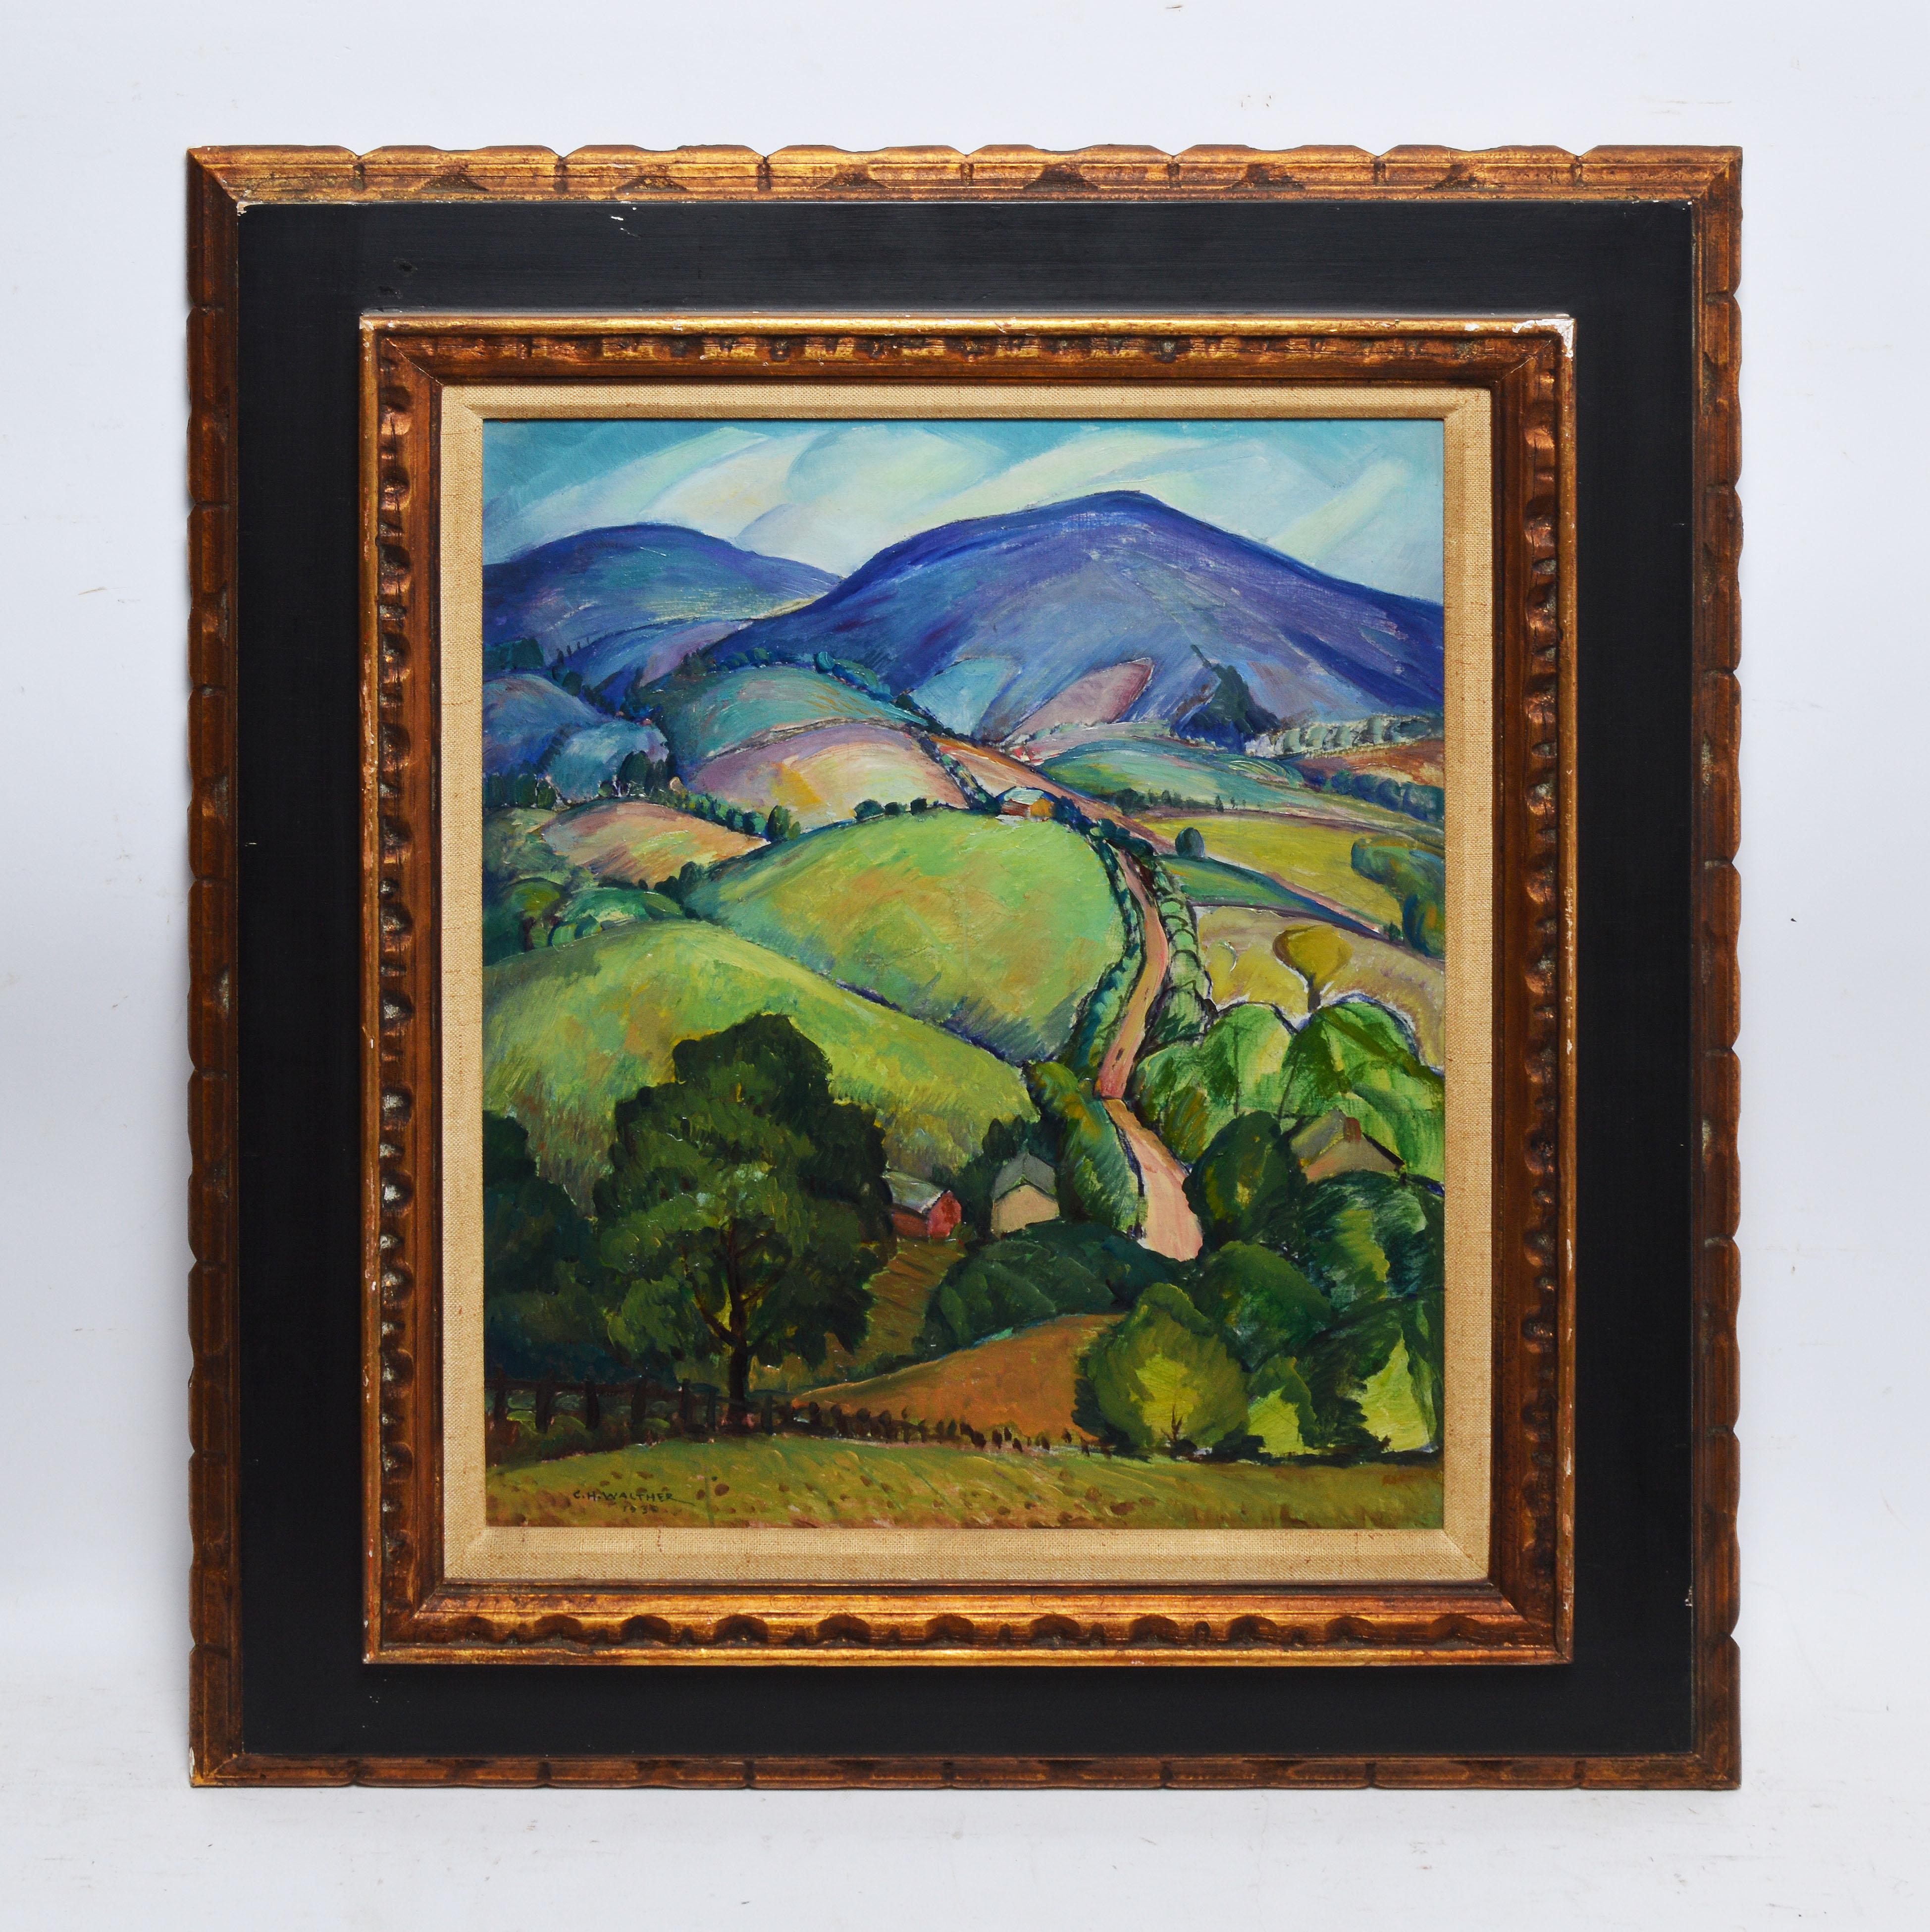 Modernist view of Butler MD by Charles Walther  (1879 - 1937).  Oil on board, circa 1930.  Signed lower left.  Displayed in a period modernist frame.  Image size, 14